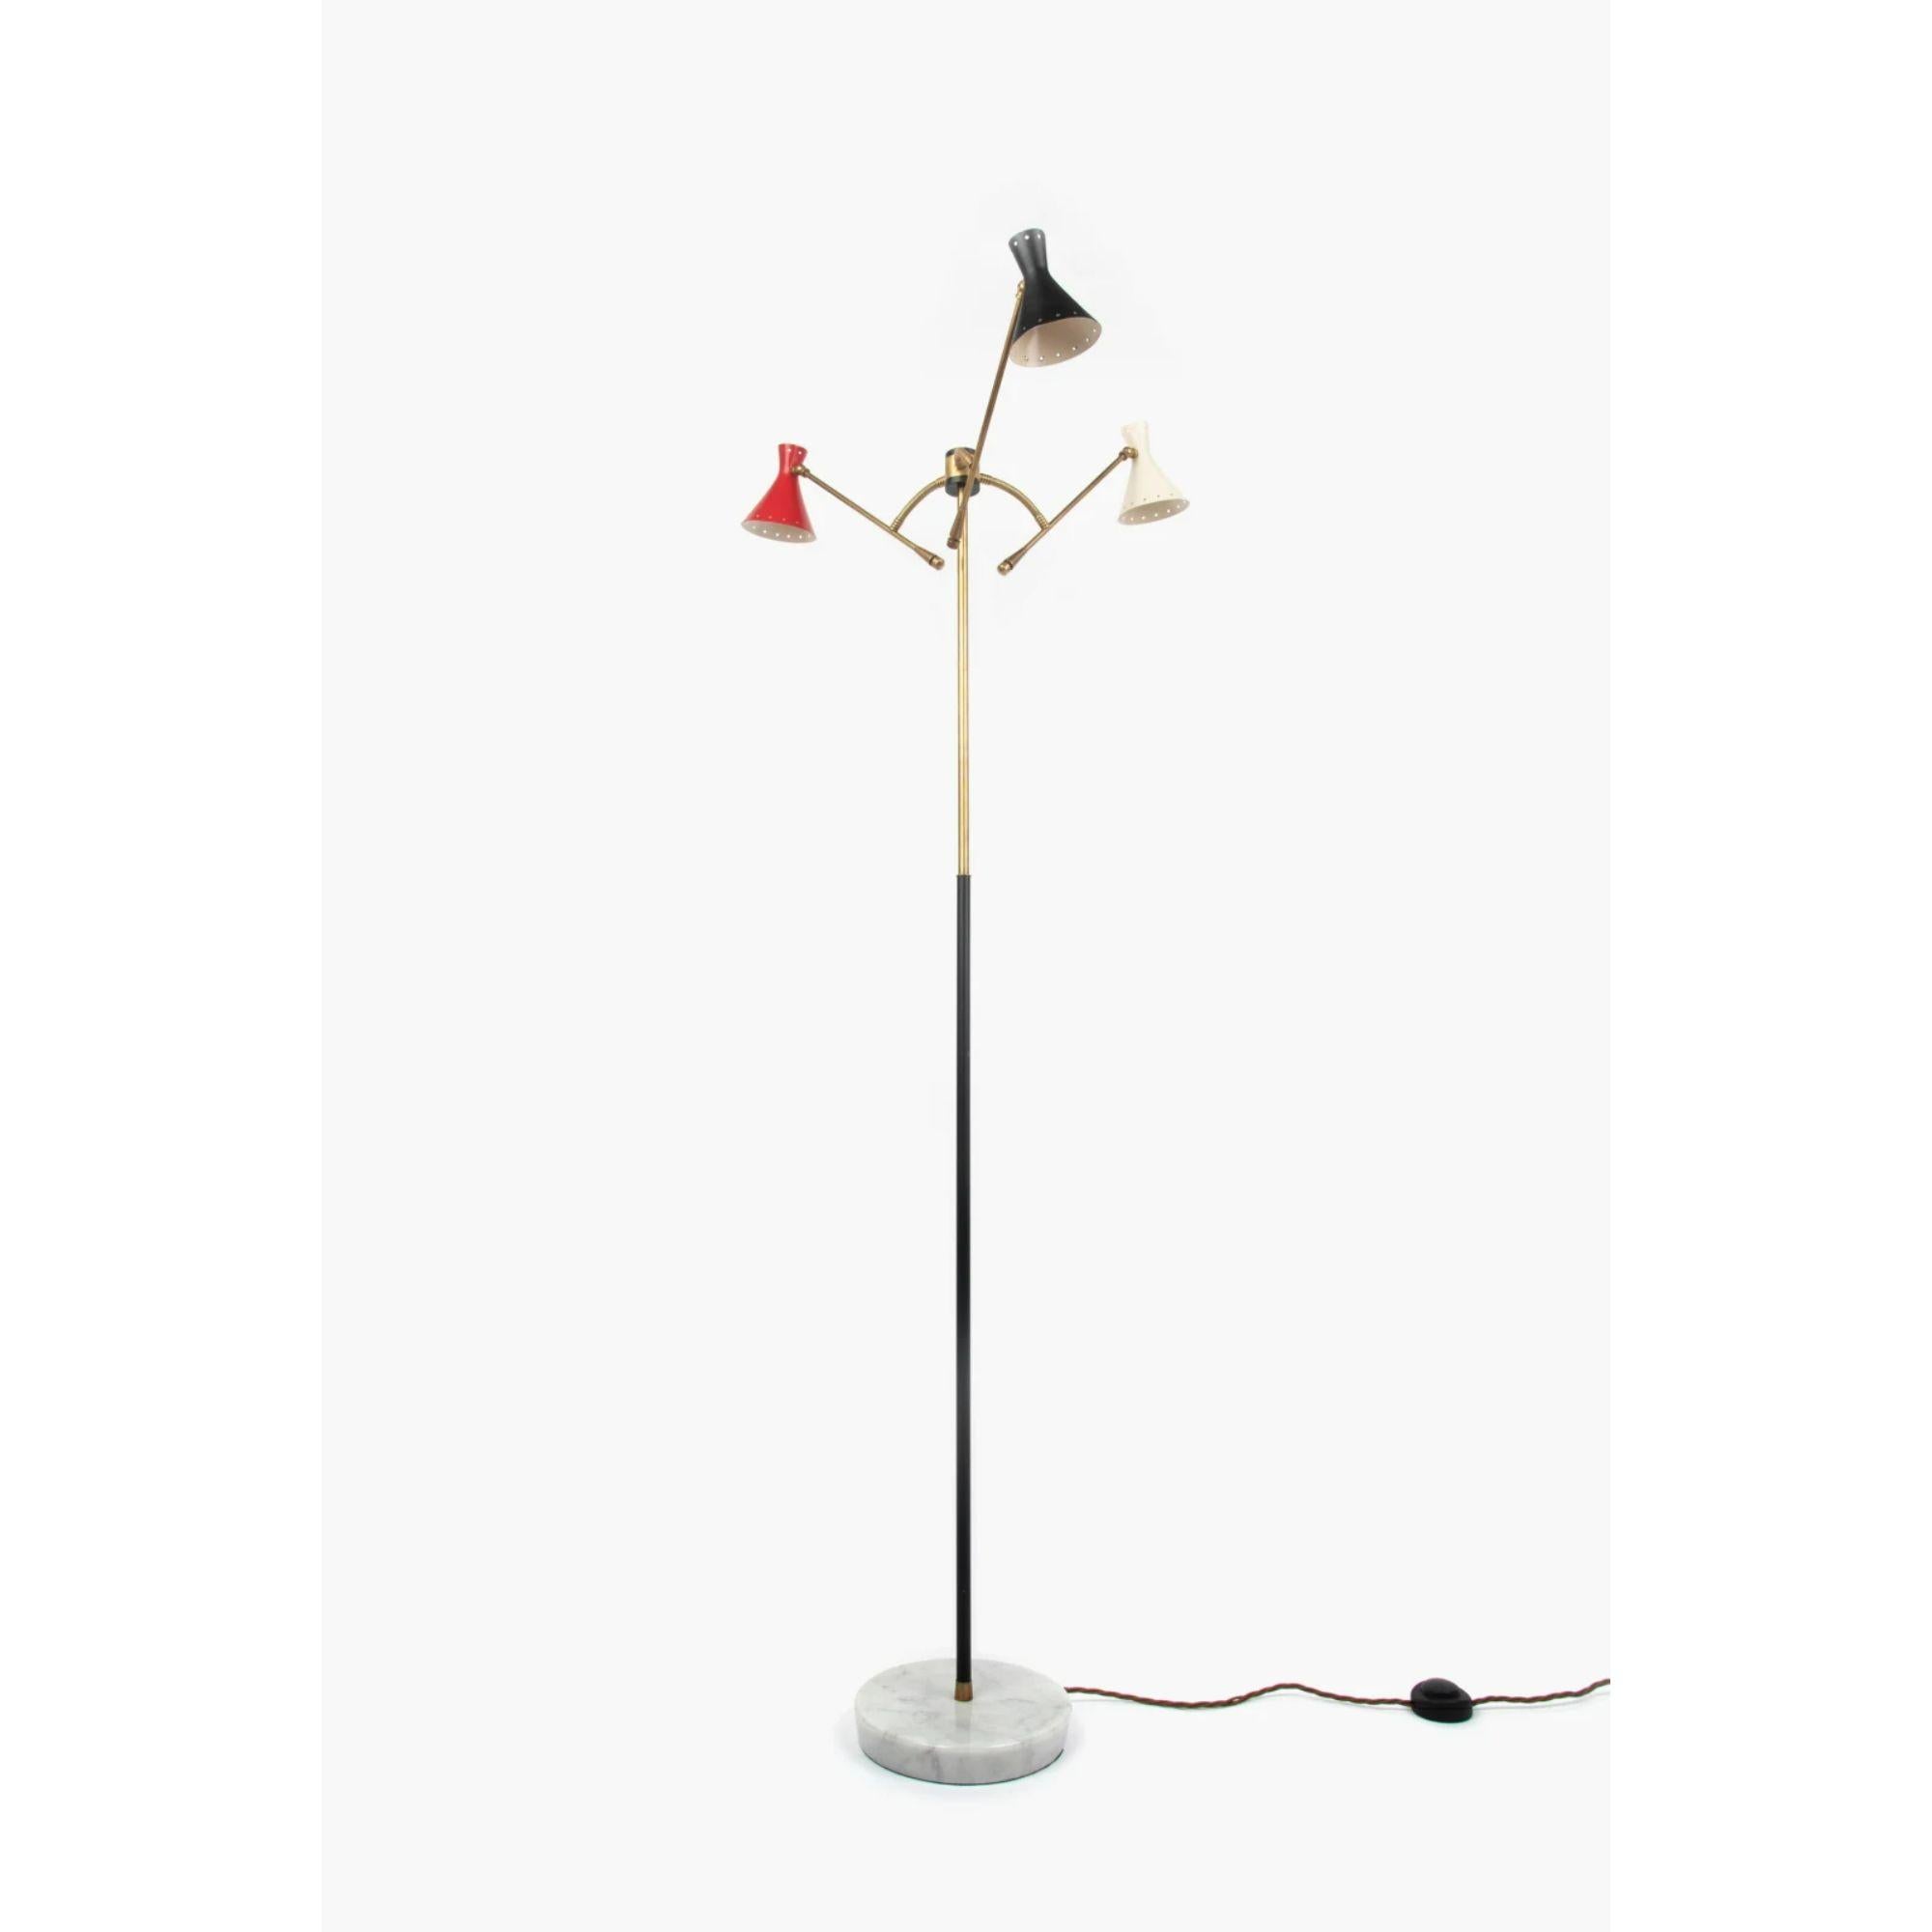 Three-Arm Italian Floor Lamp, 1950s

Dimensions: H 140cm x W 60cm
Base Diameter: 24 cm
Condition: Restored and wired for UK use. Can be supplied wired for EU/US.